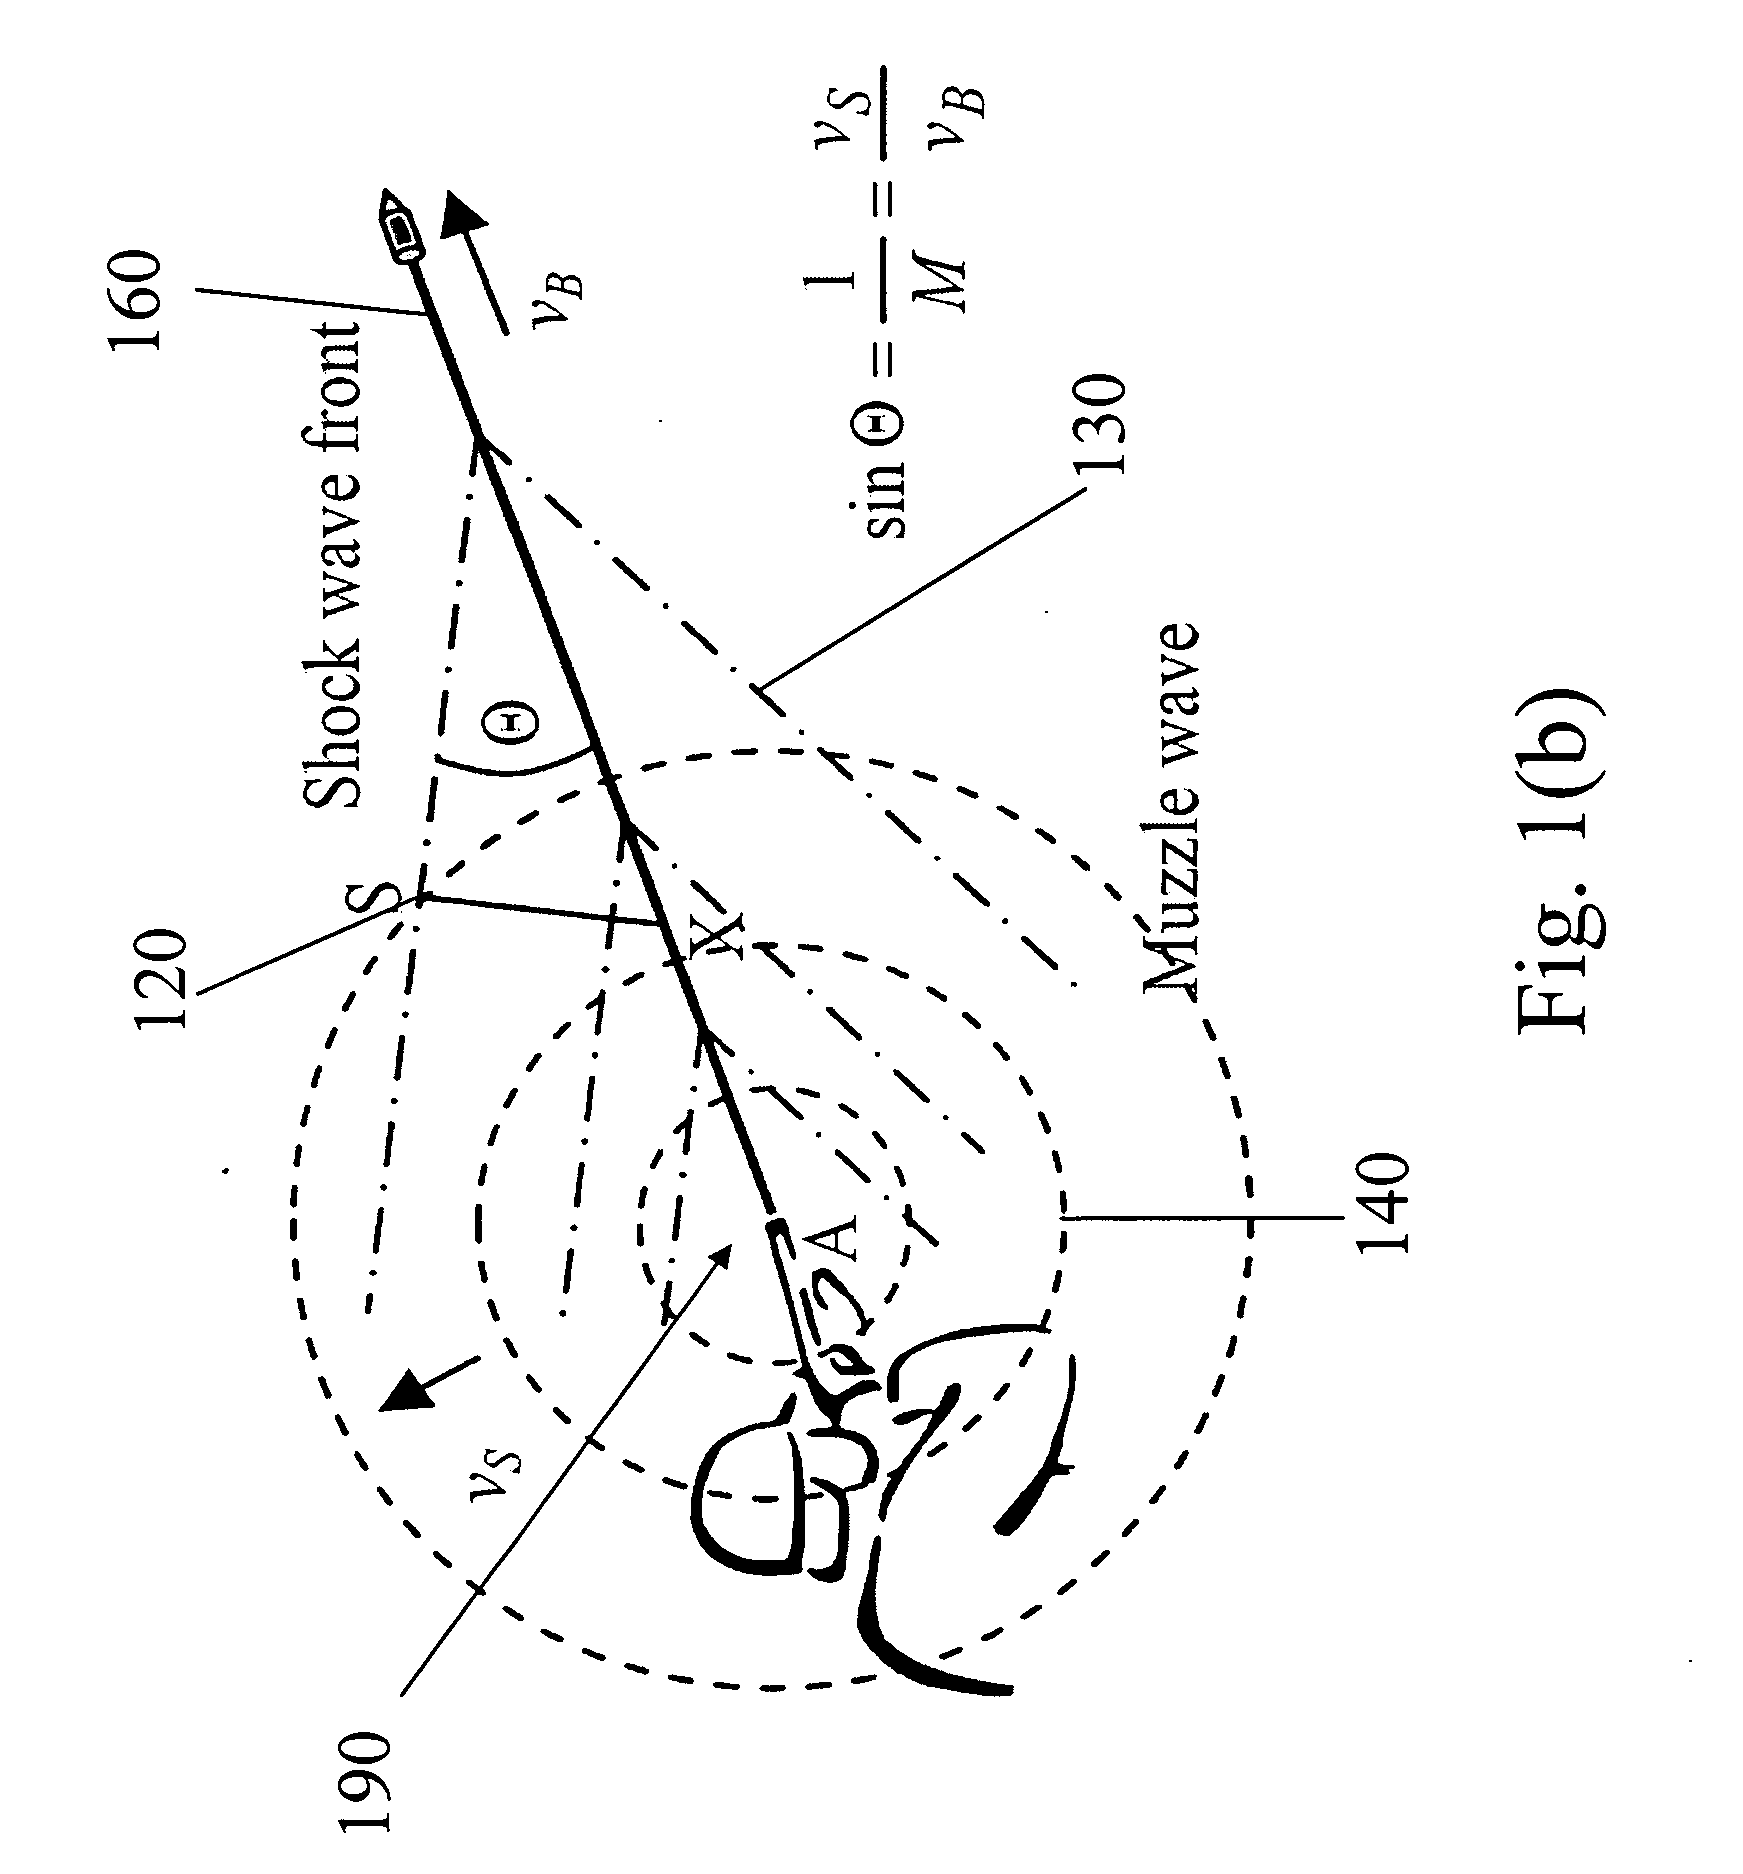 Acoustic source localization system and applications of the same